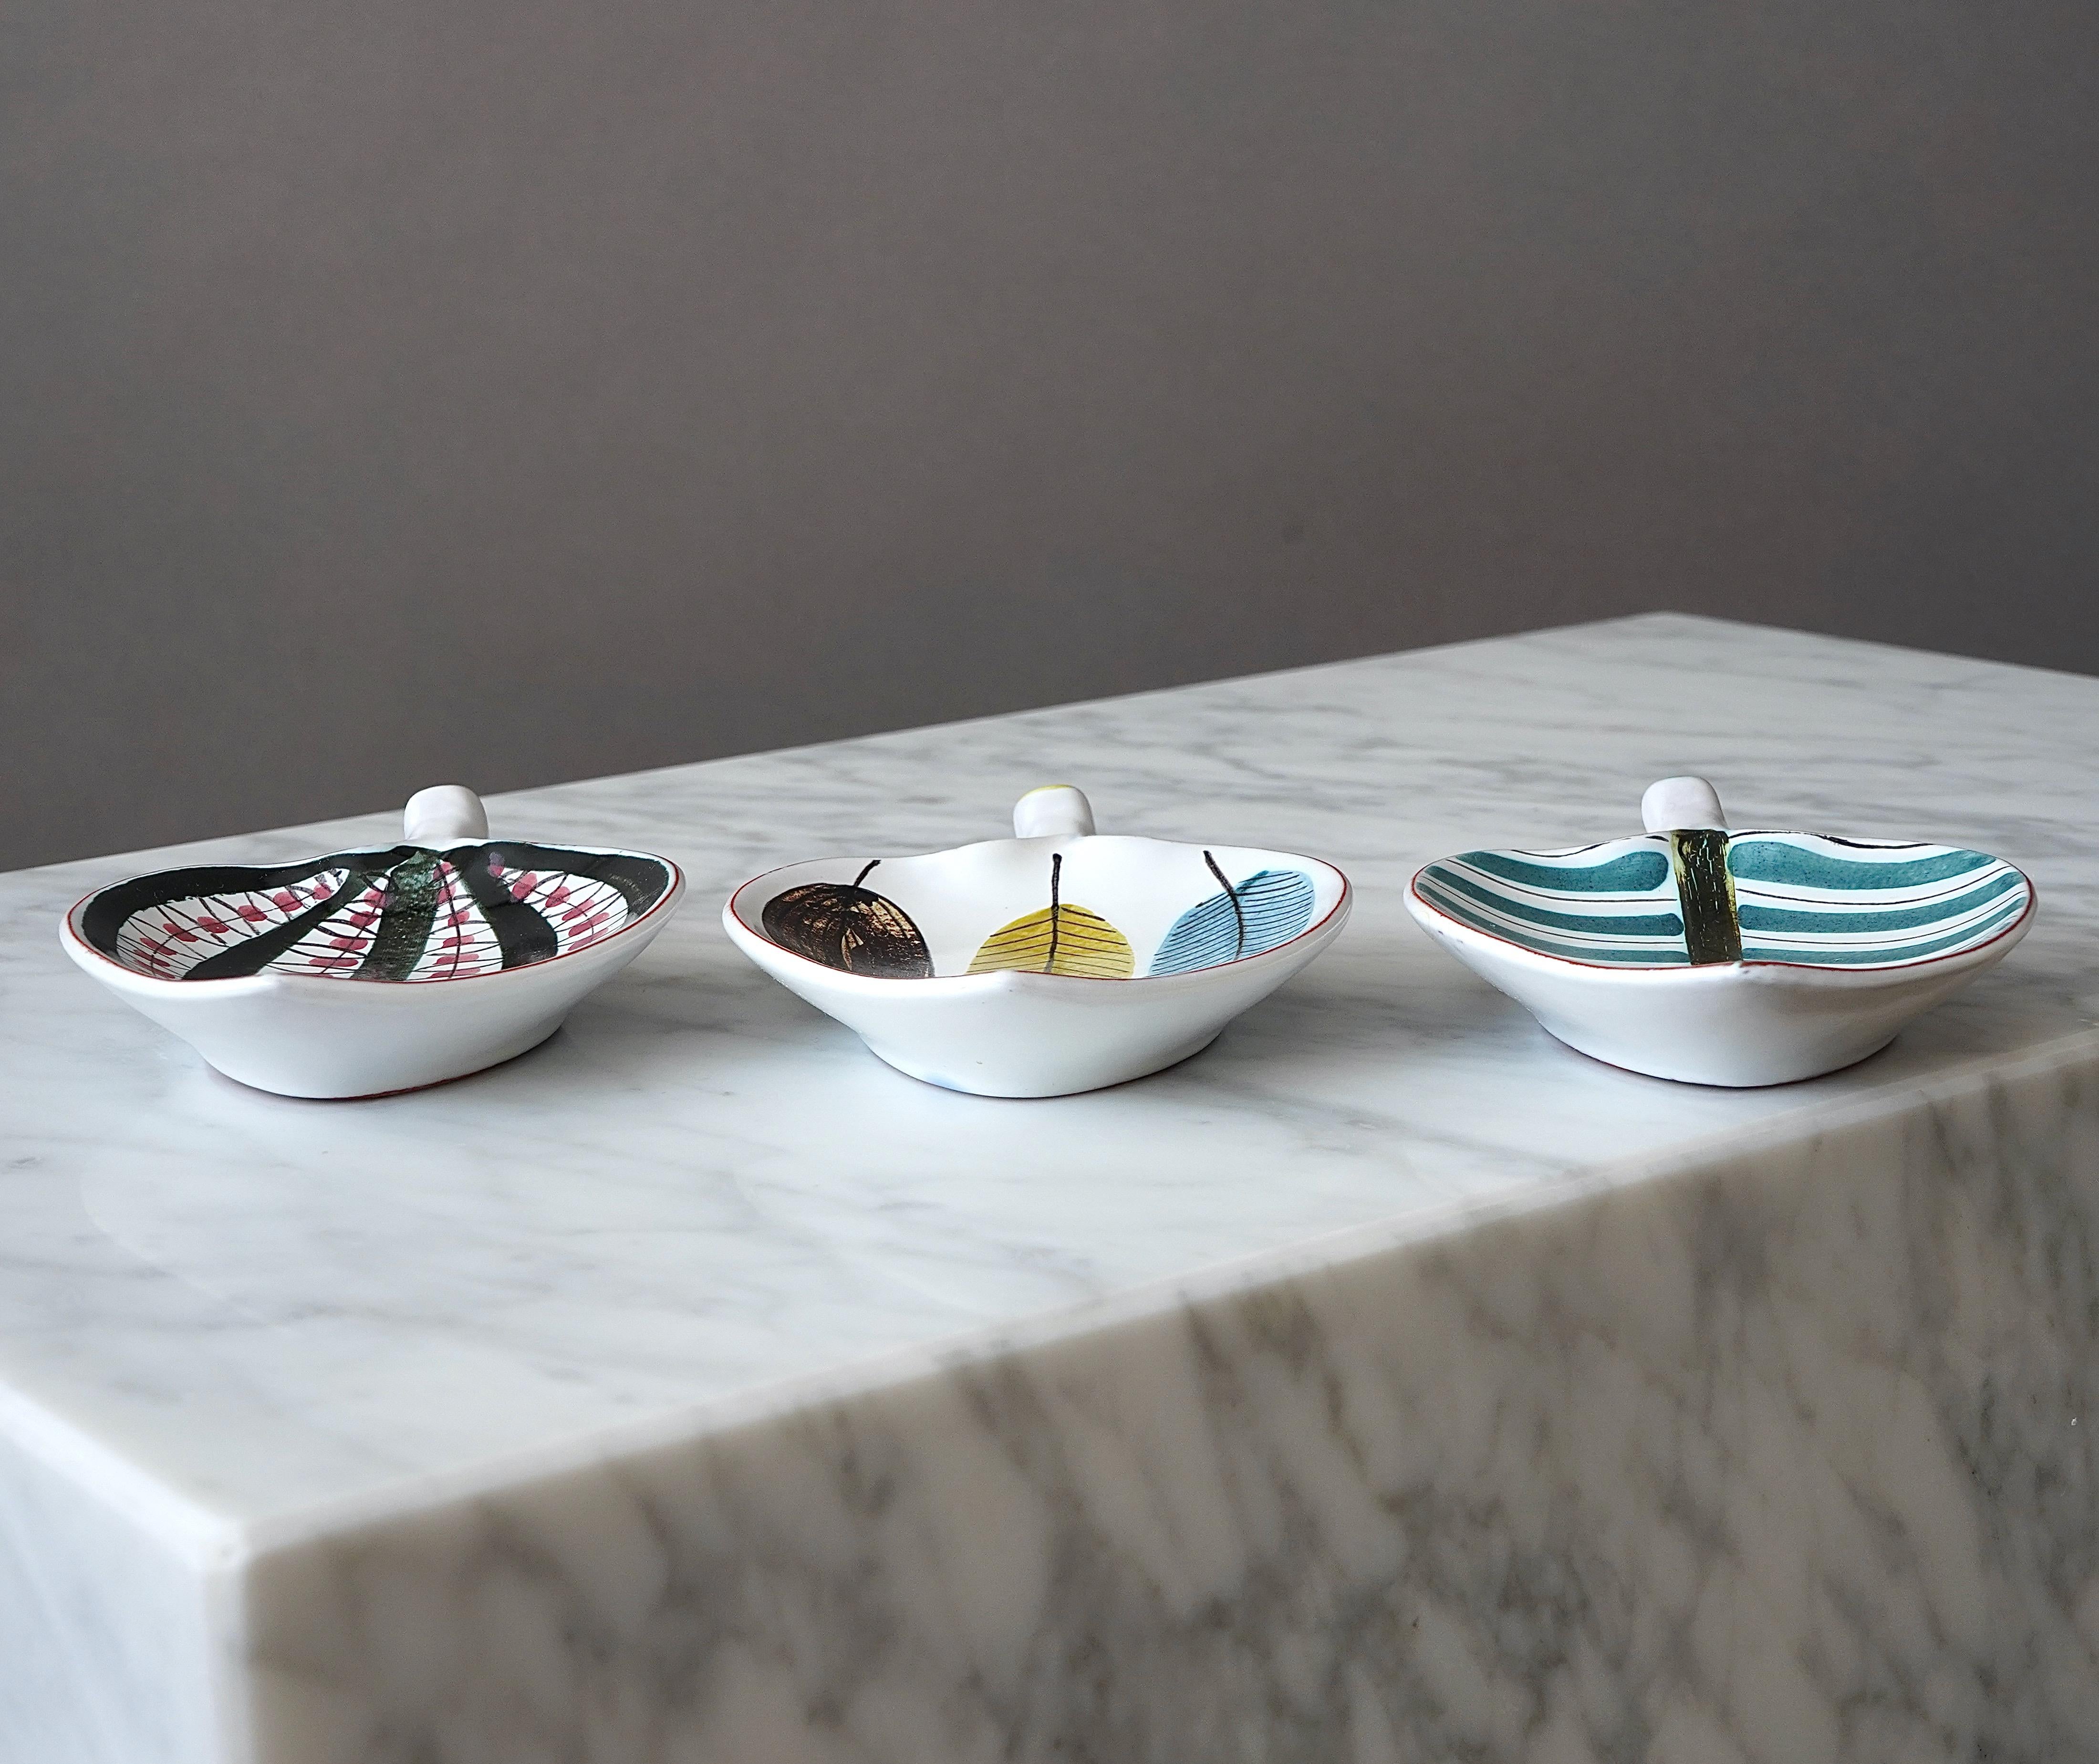 Mid-Century Modern Set of 3 Faience Dishes by Stig Lindberg for Gustavsberg Studio, Sweden, 1950s For Sale